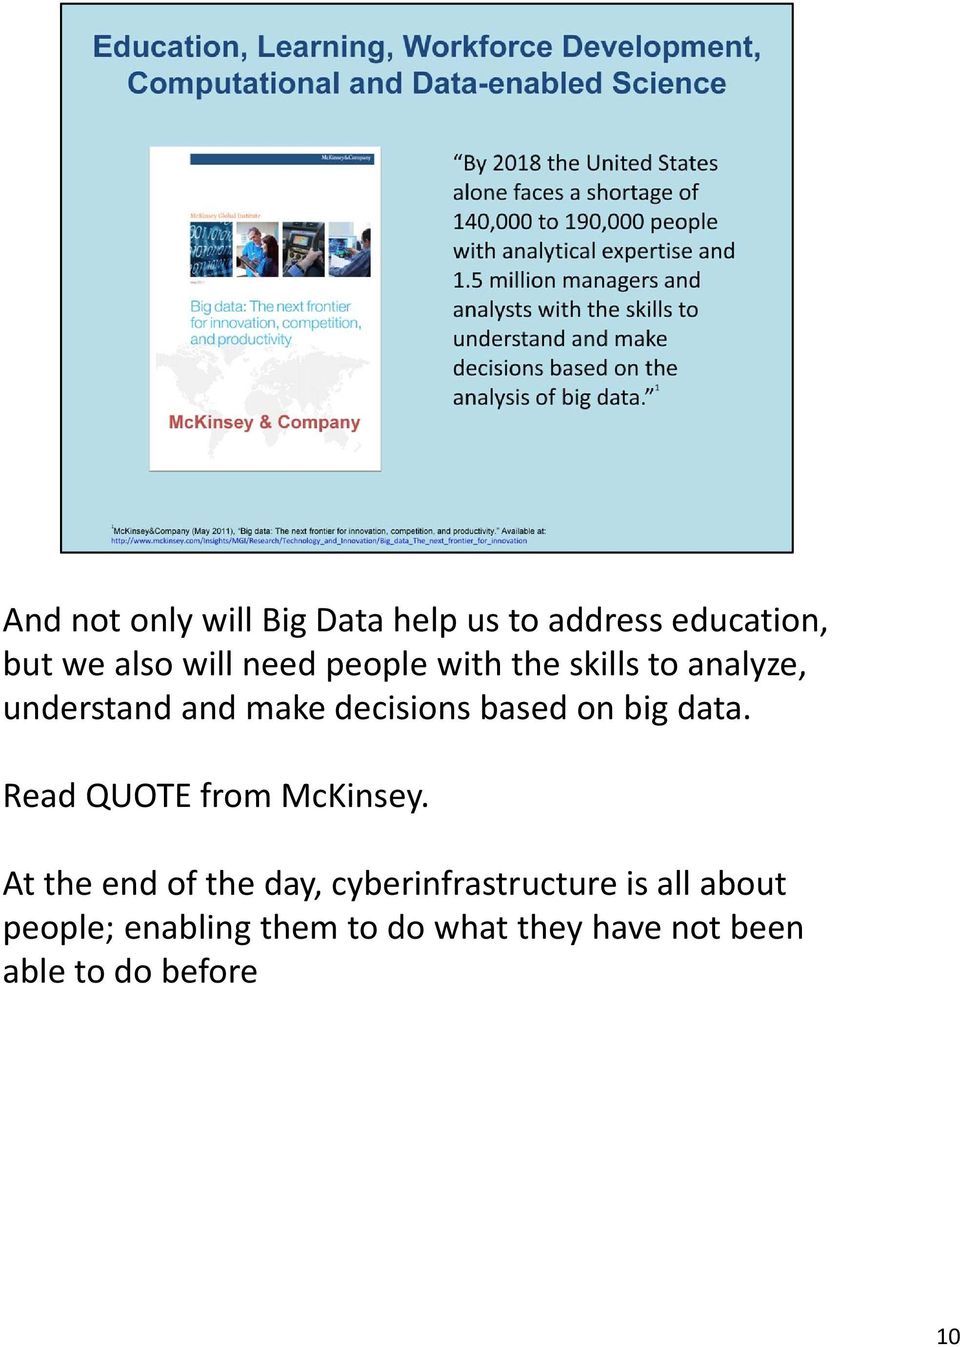 data. Read QUOTE from McKinsey.